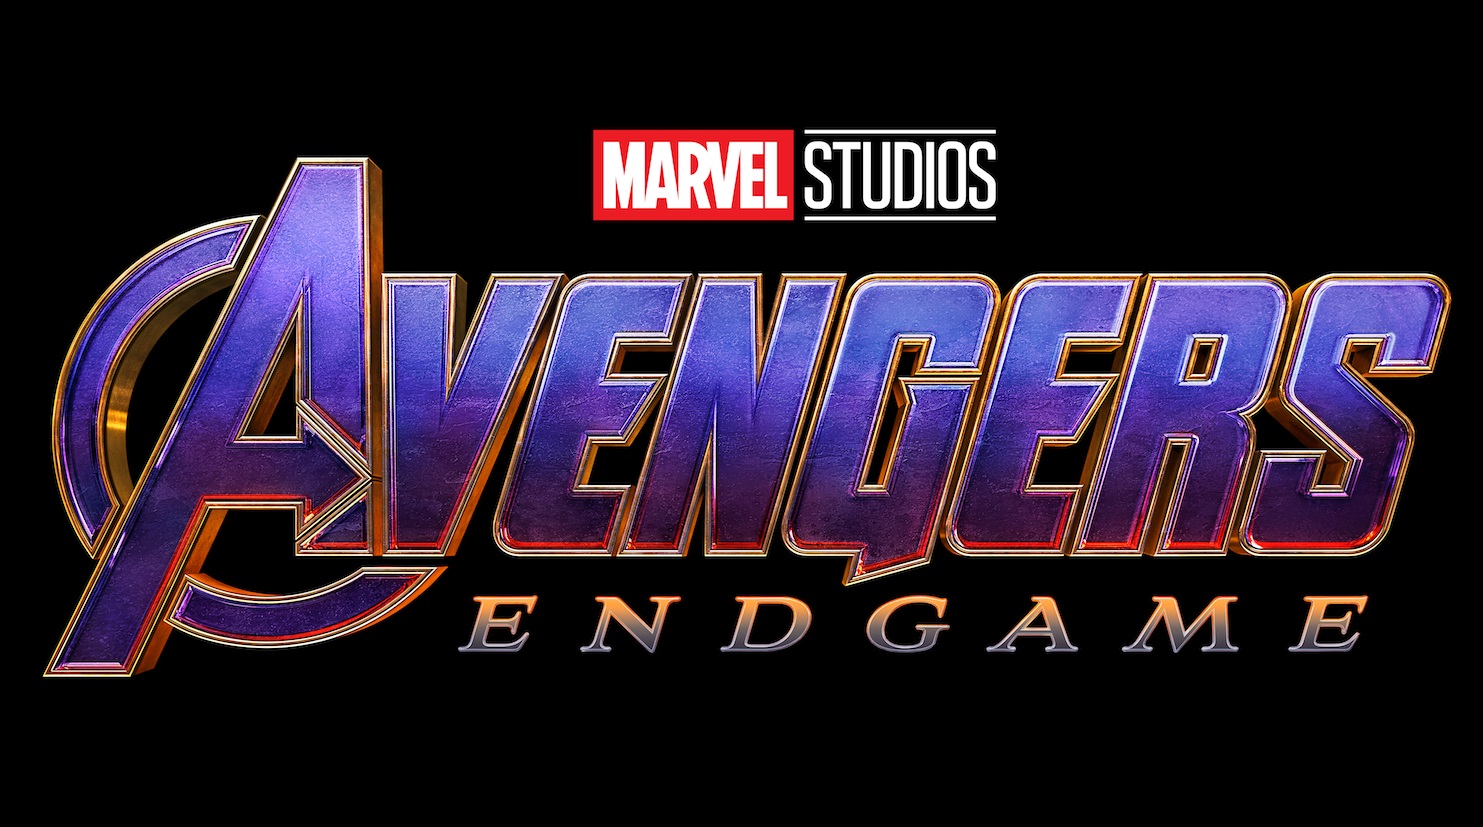 Marvel explains why it took so long to reveal the 'Avengers: Endgame' title